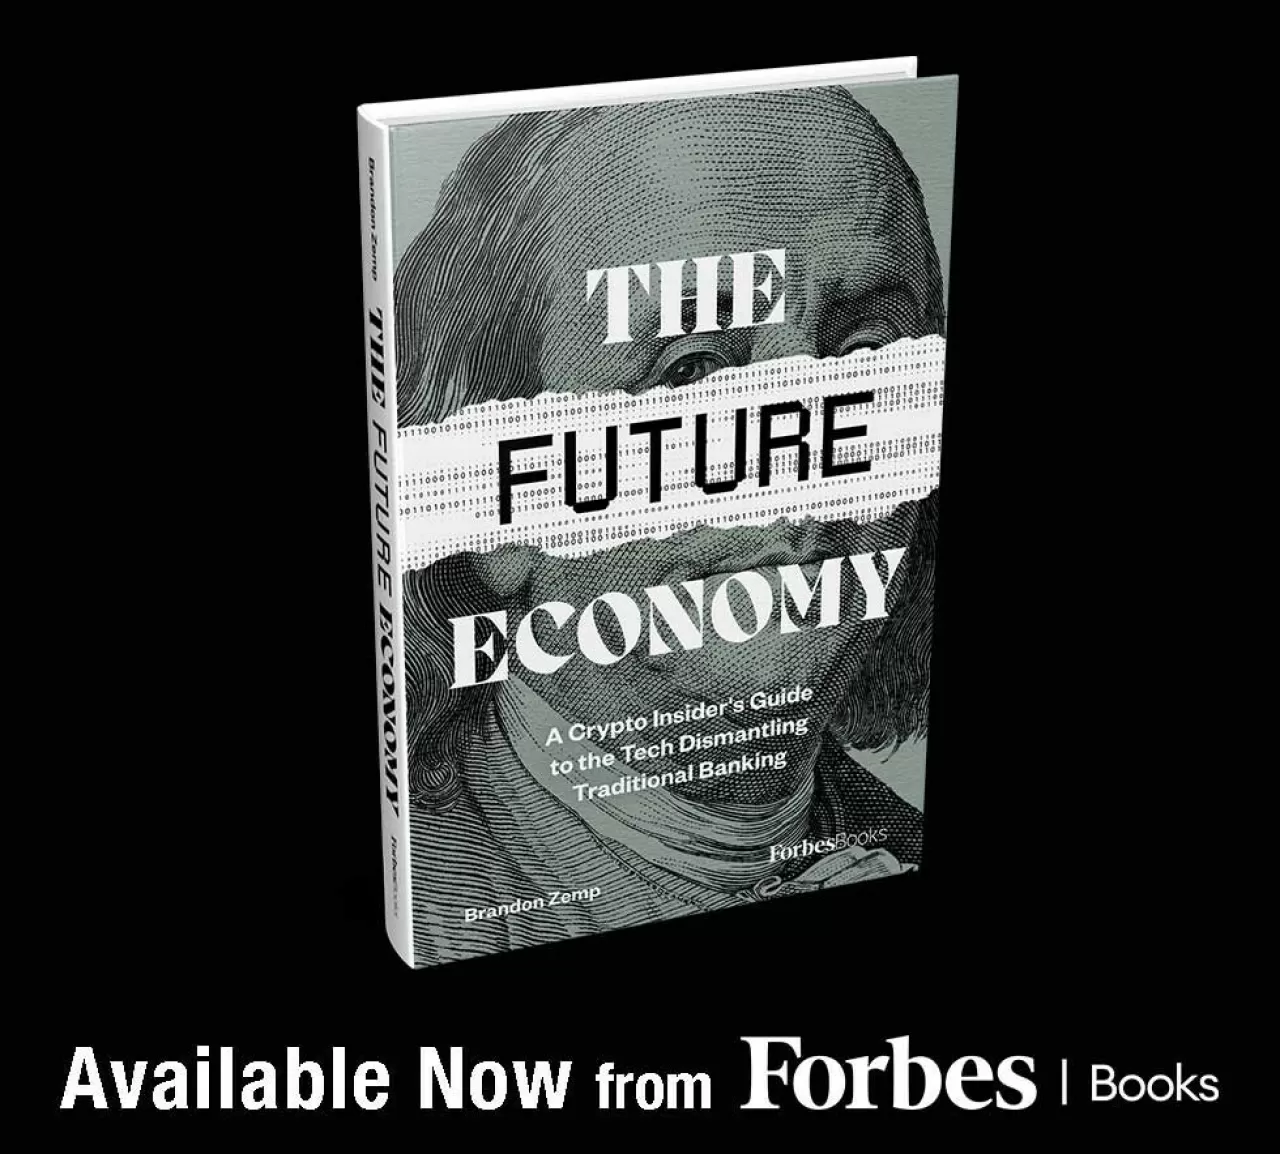 Brandon Zemp Releases The Future Economy with Forbes Books img#1